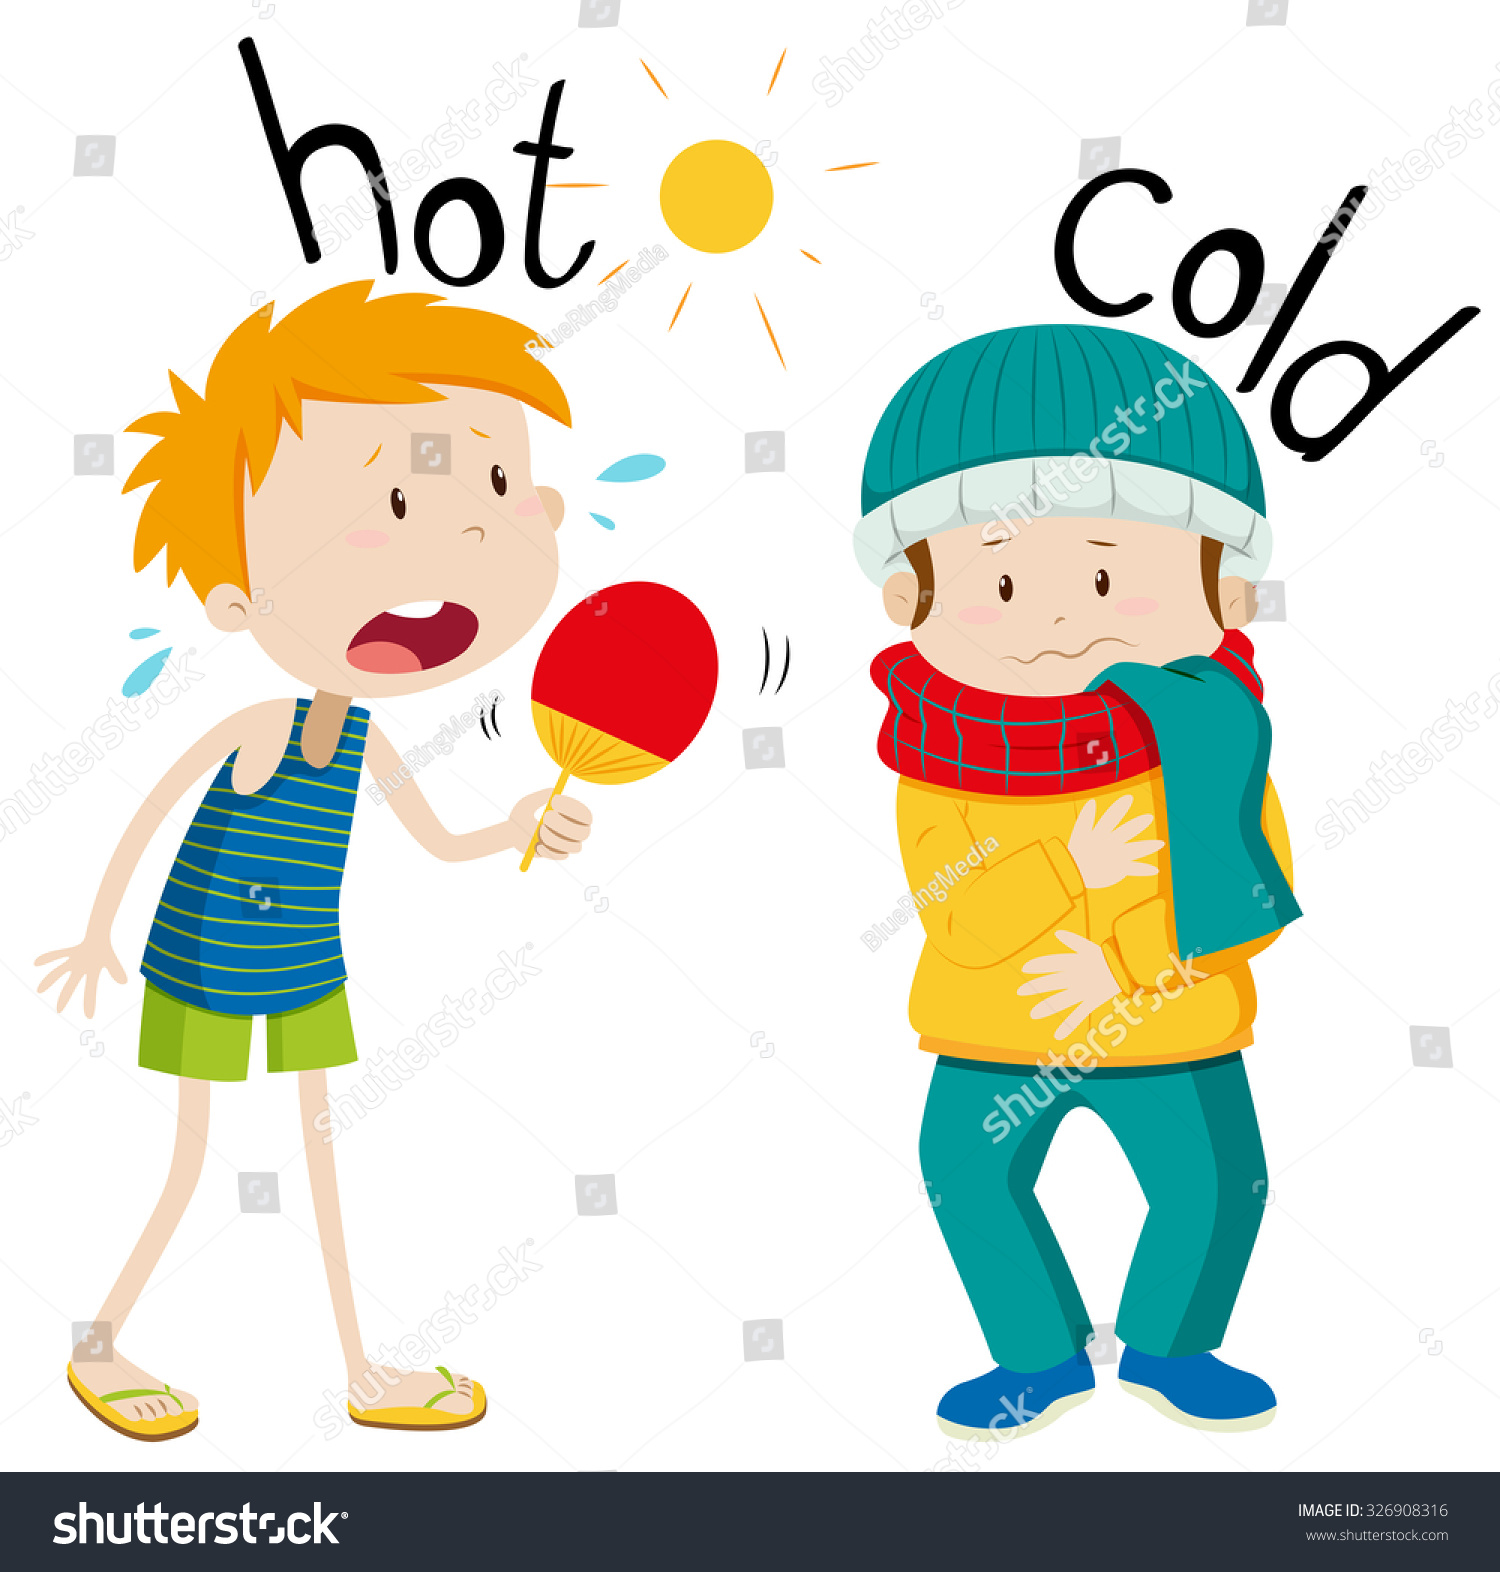 Hot In Cold